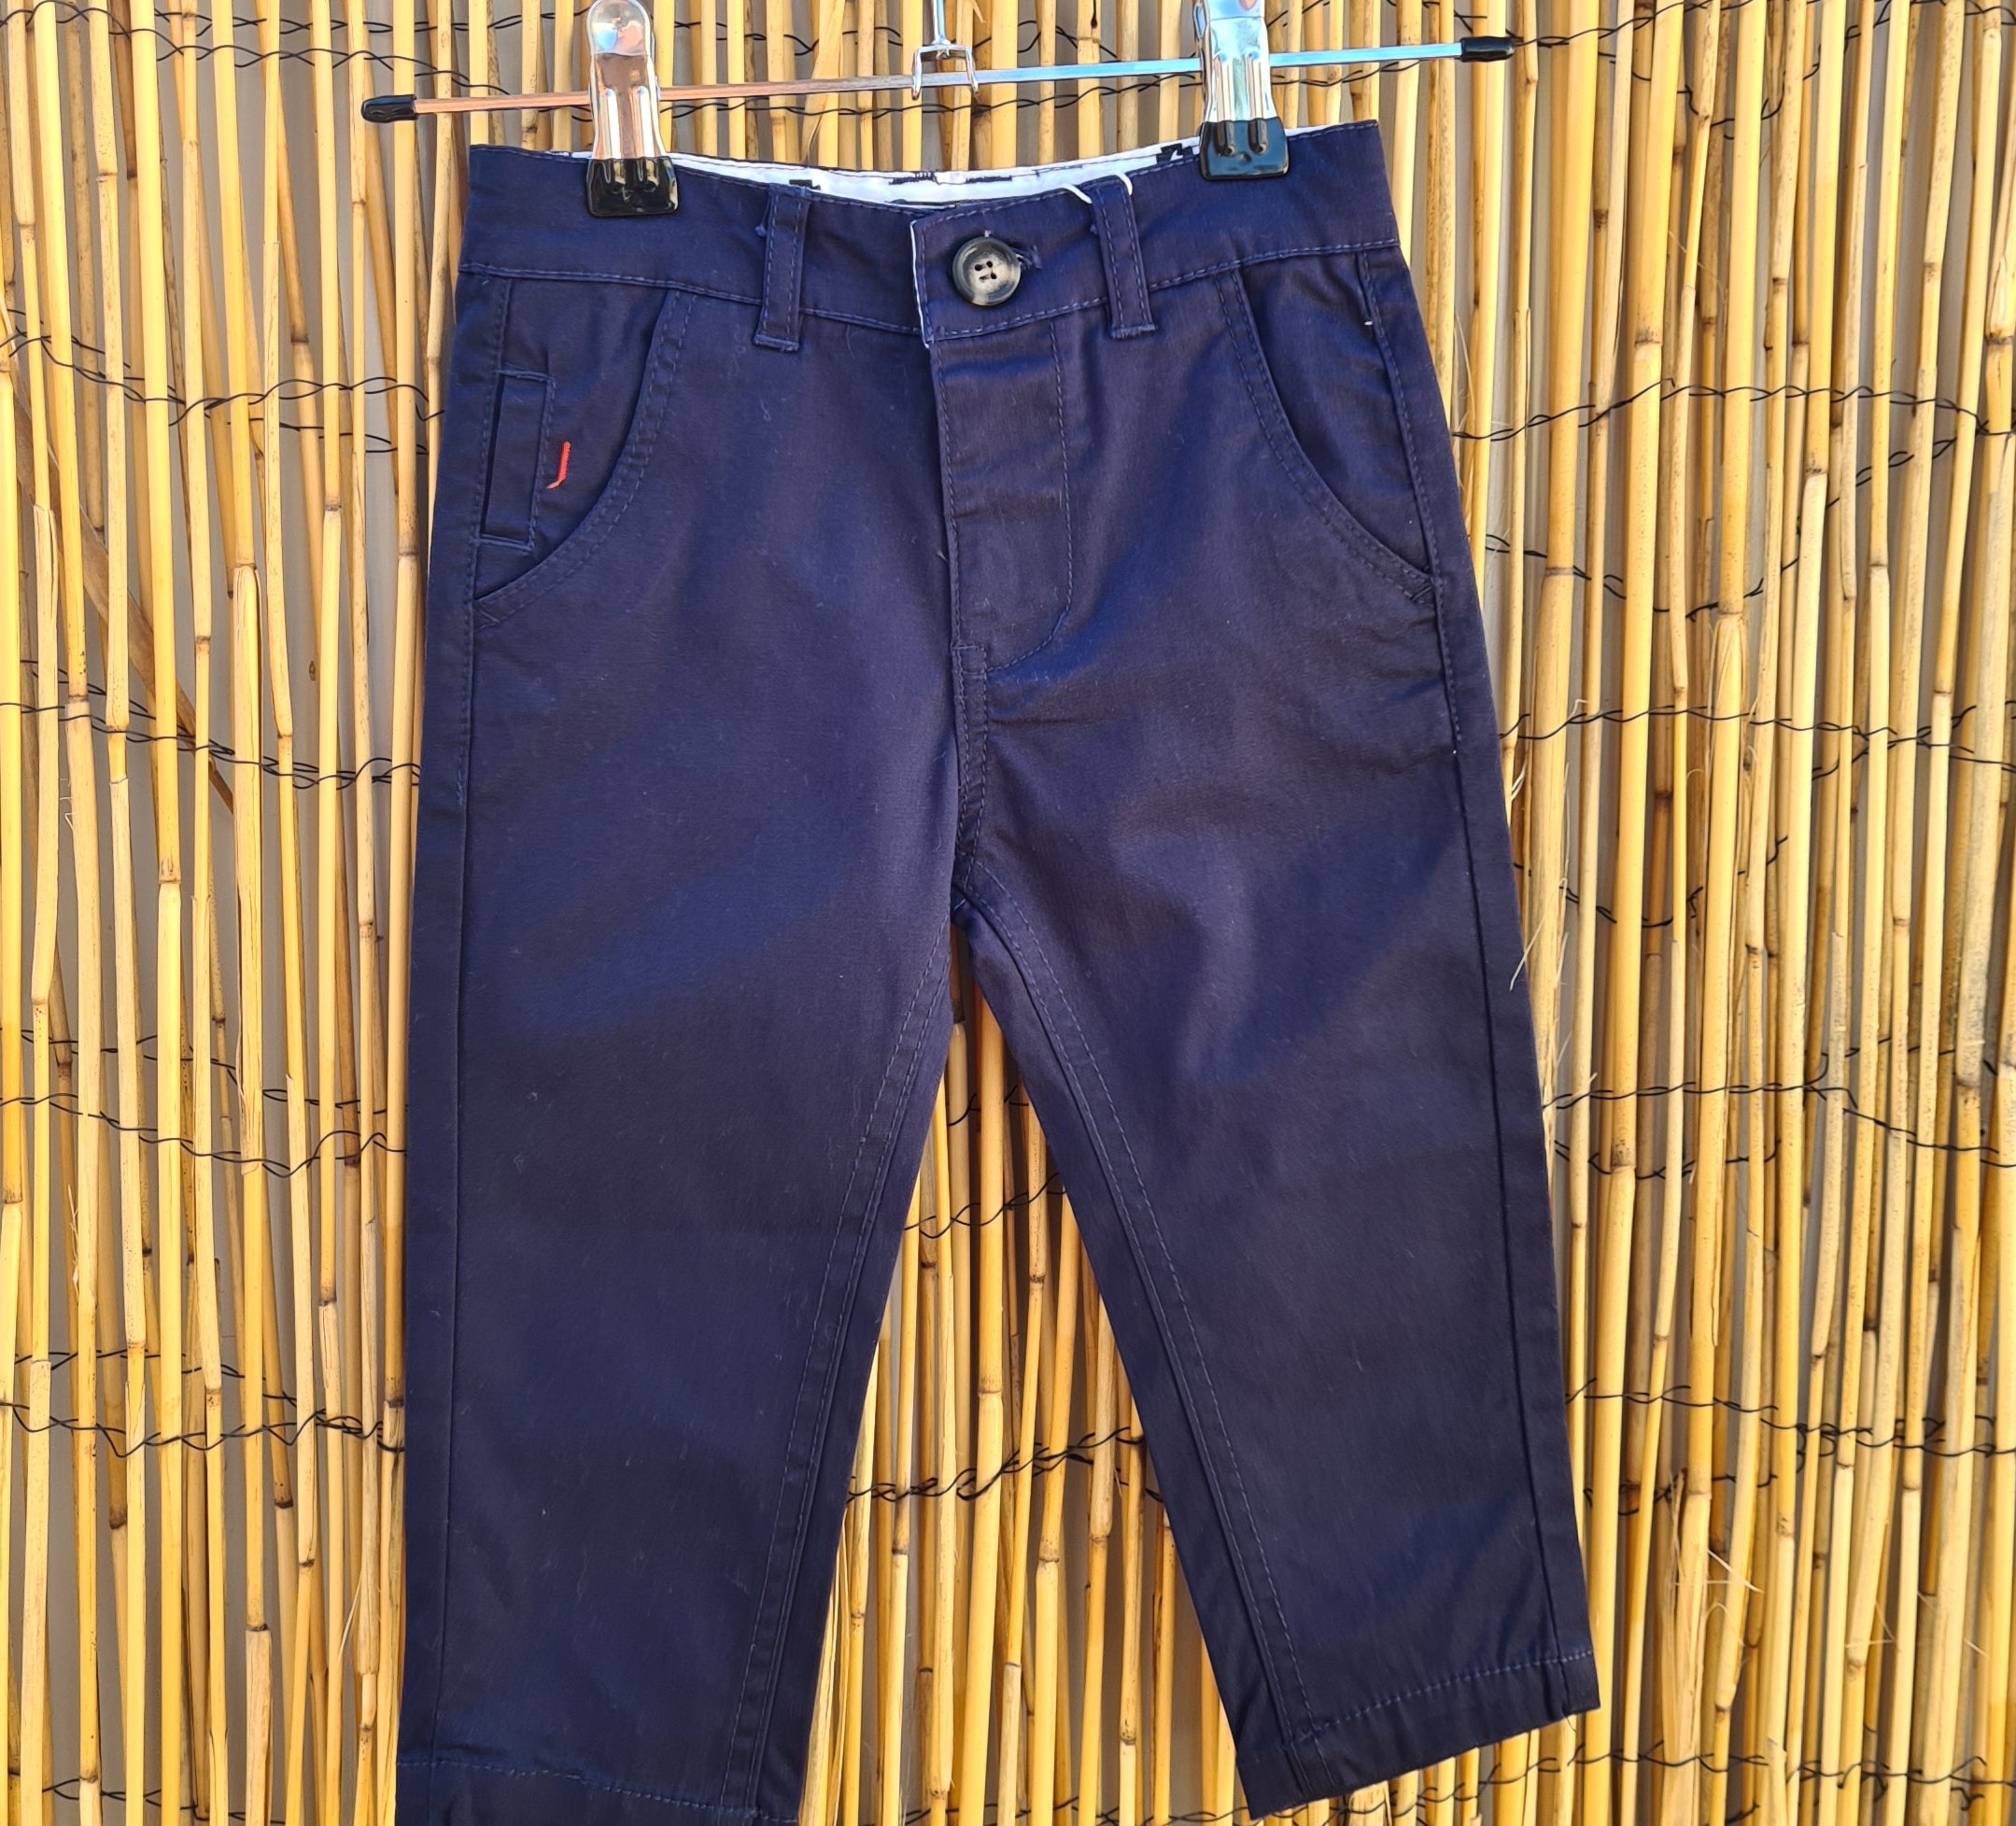 Boys Chino Navy Pant With Adjustable Waist